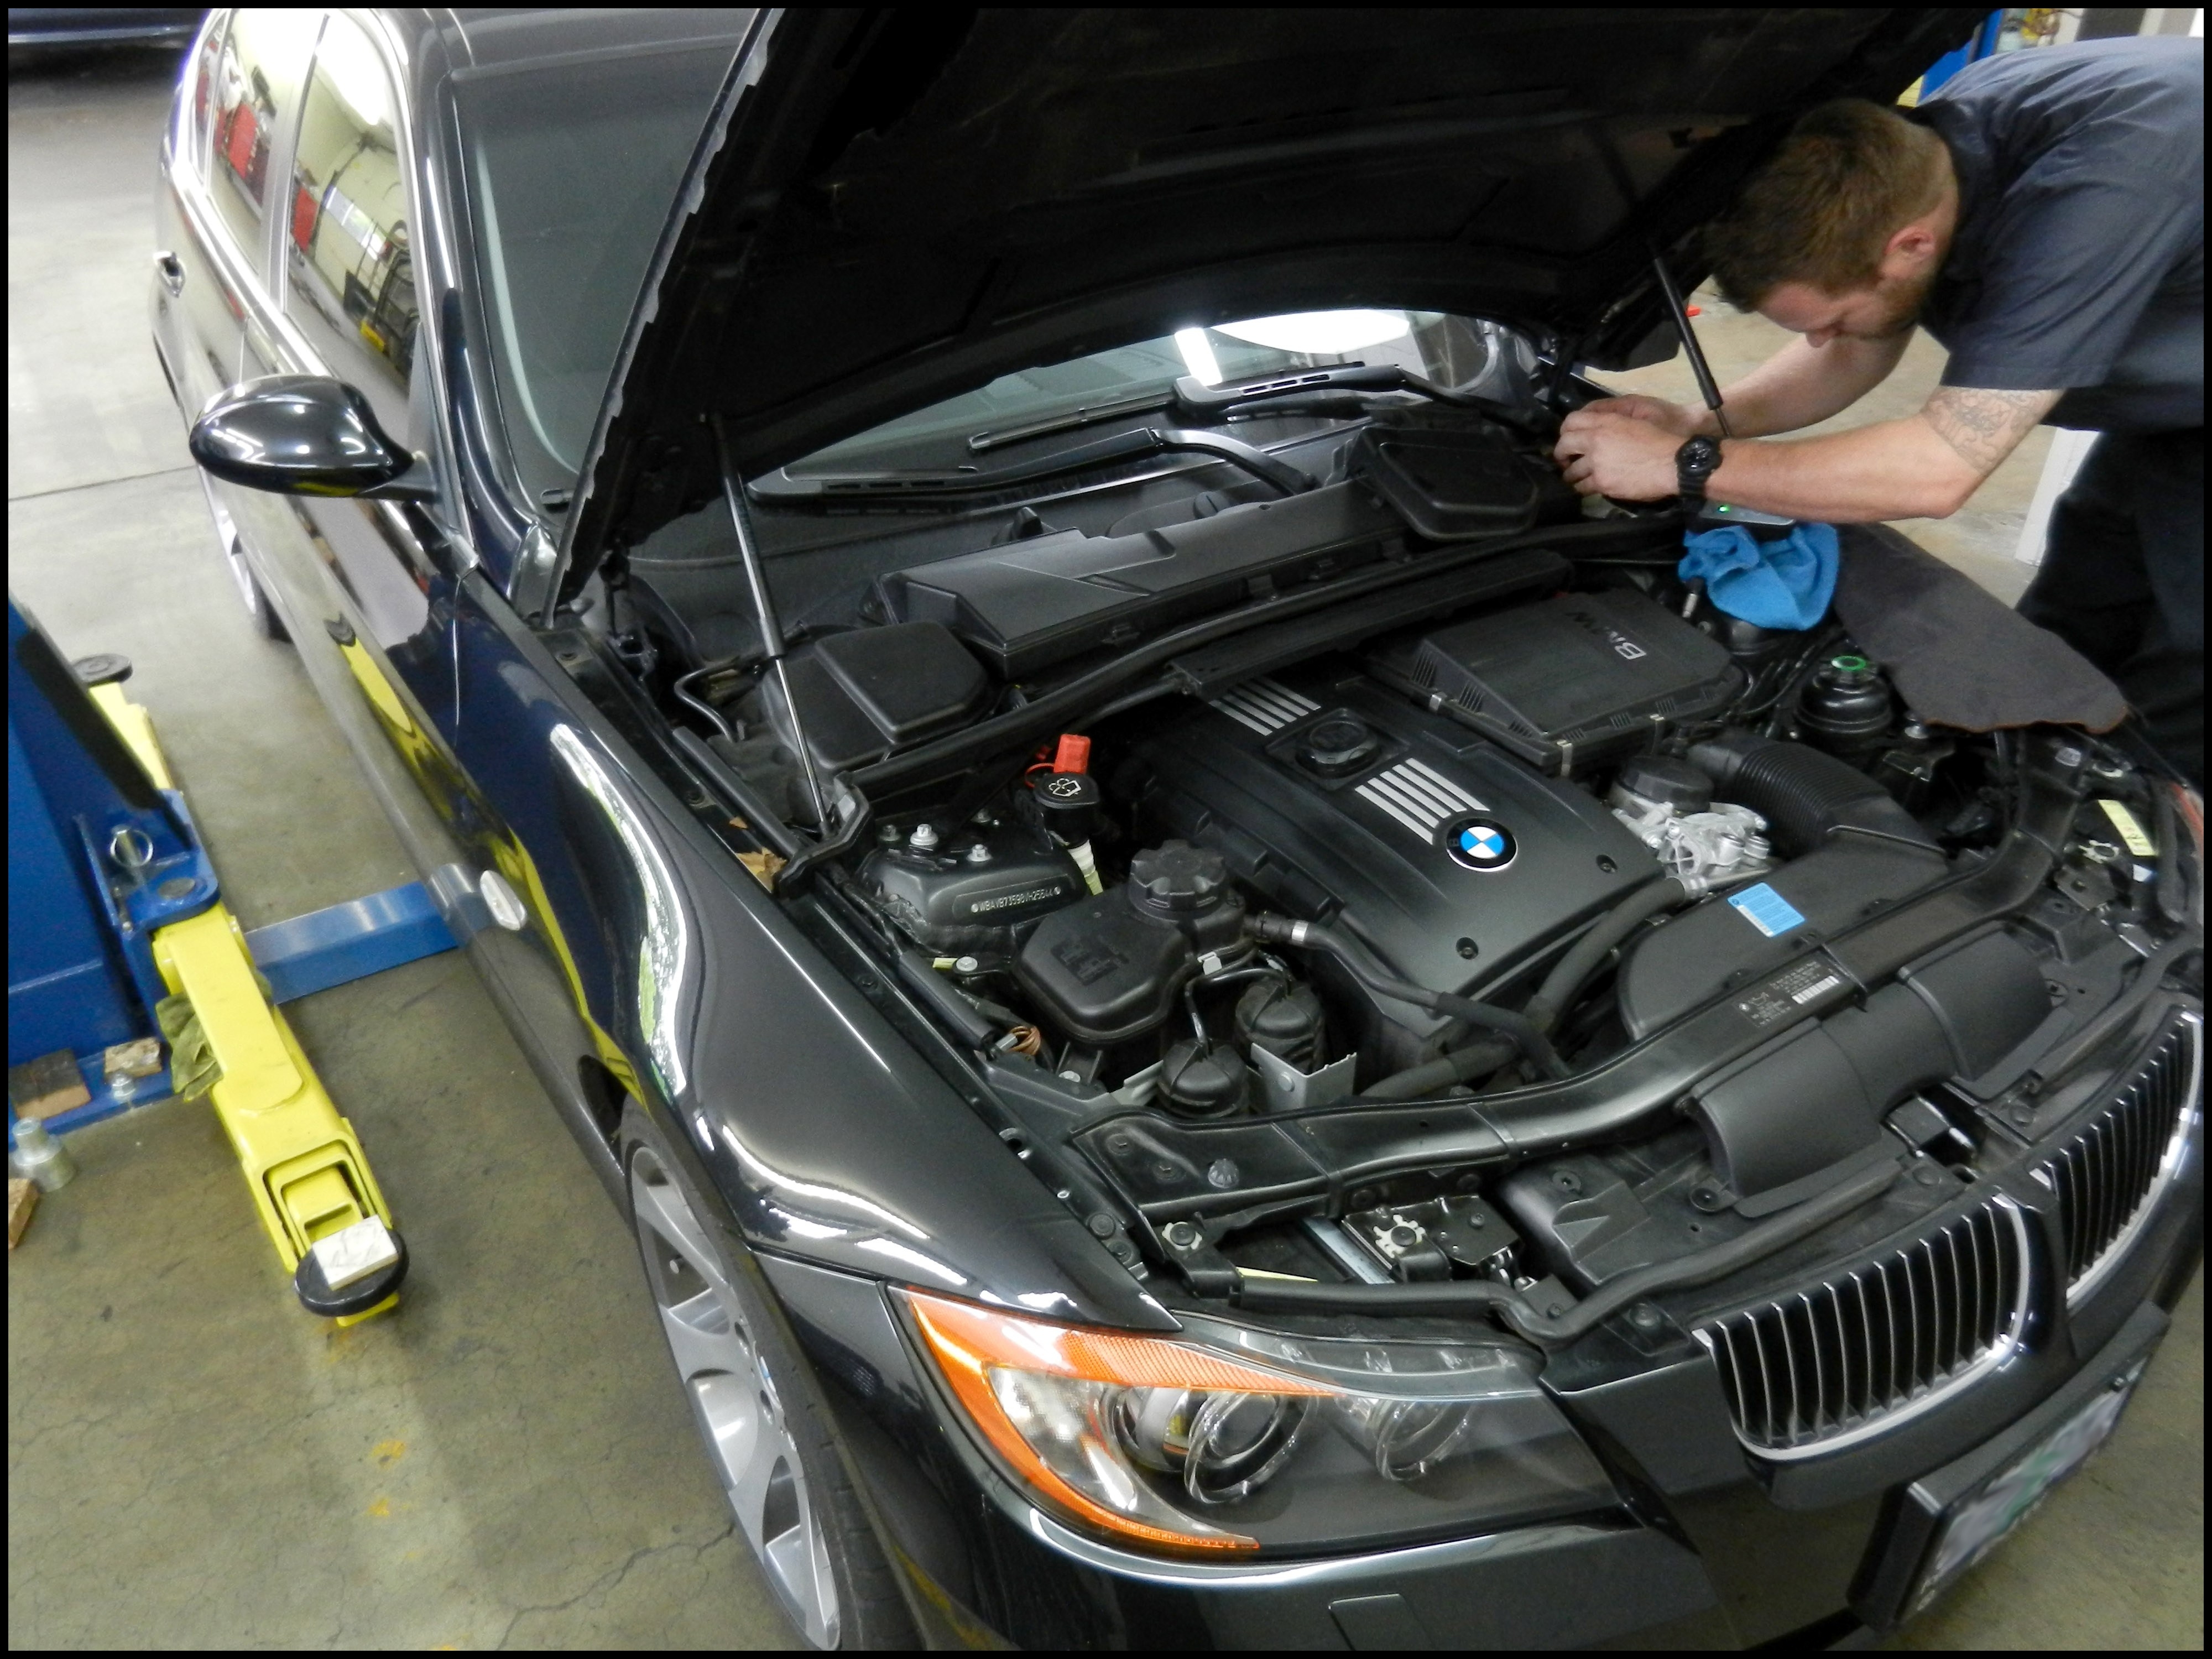 Attention to detail maintenance on E90 BMW 335i